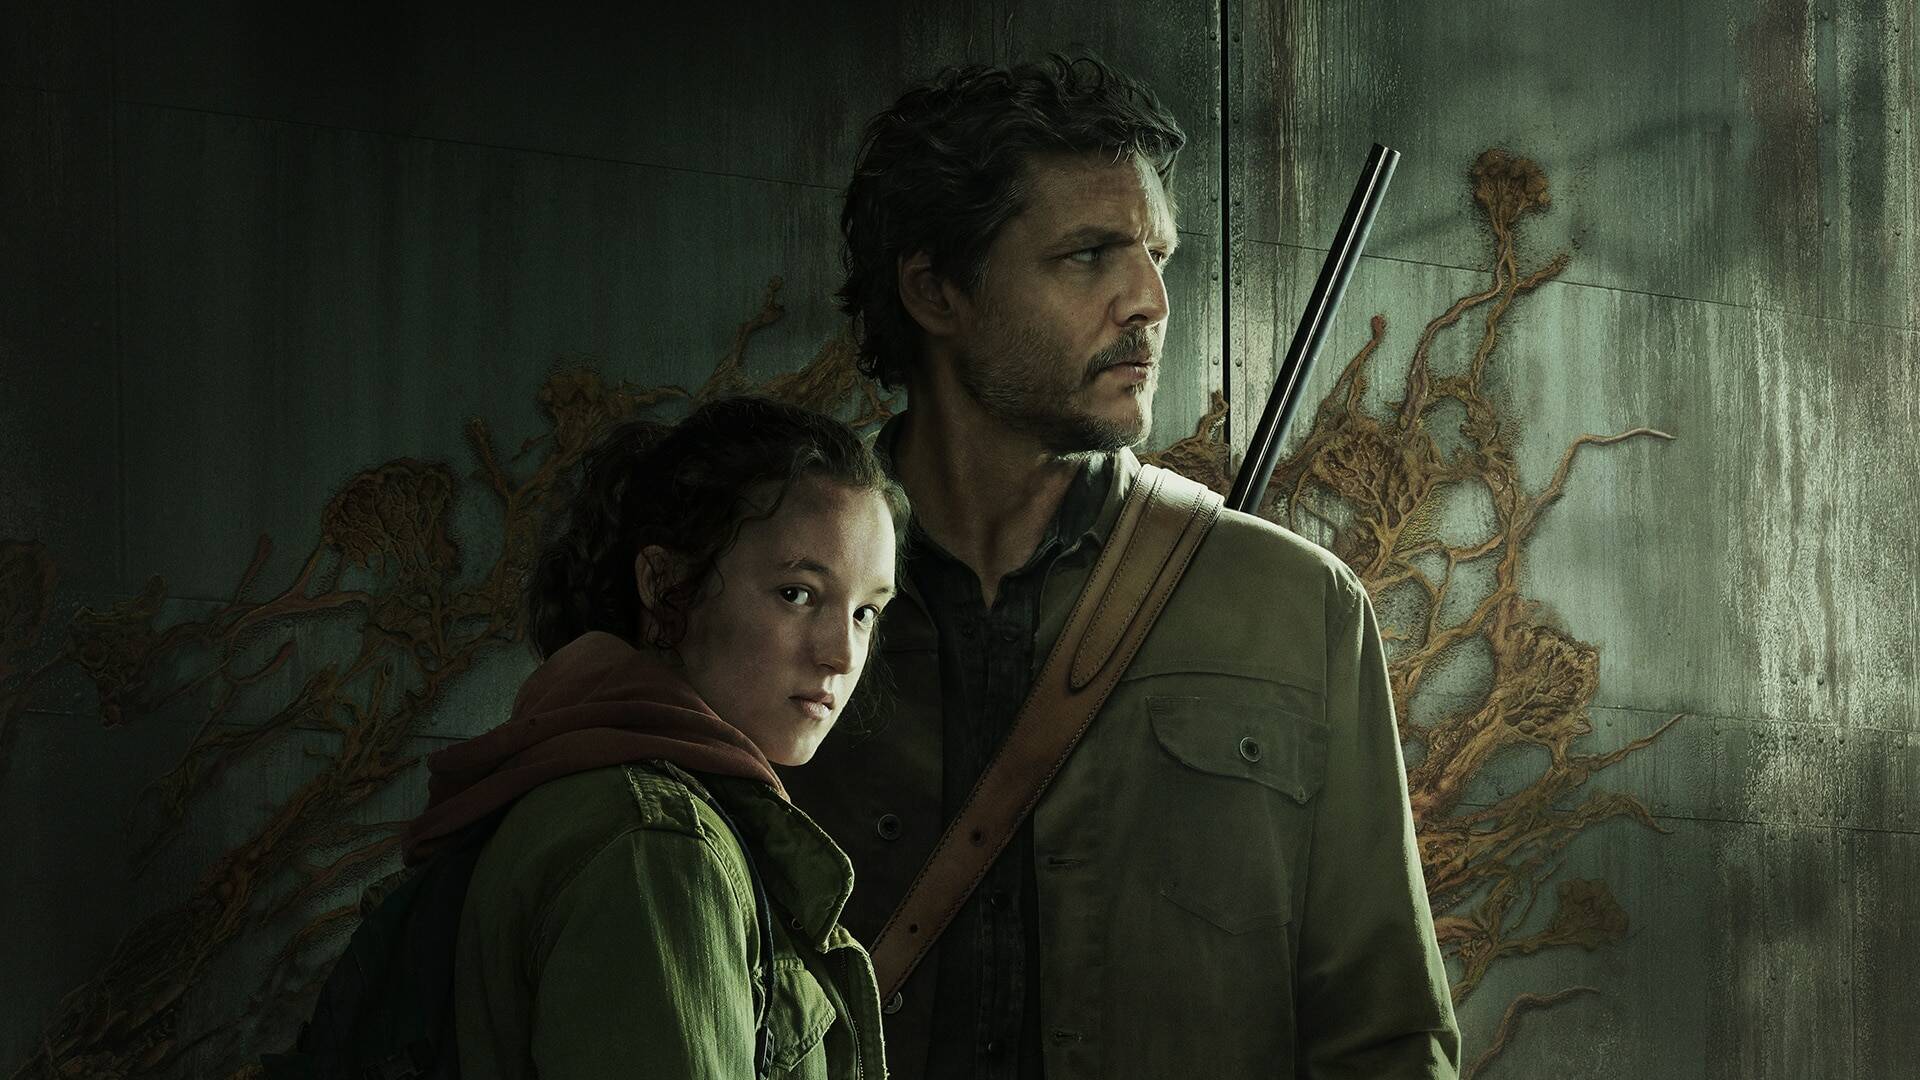 Bella Ramsey as Ellie and Pedro Pascal as Joel in “The Last of Us.” (Photo courtesy HBO)